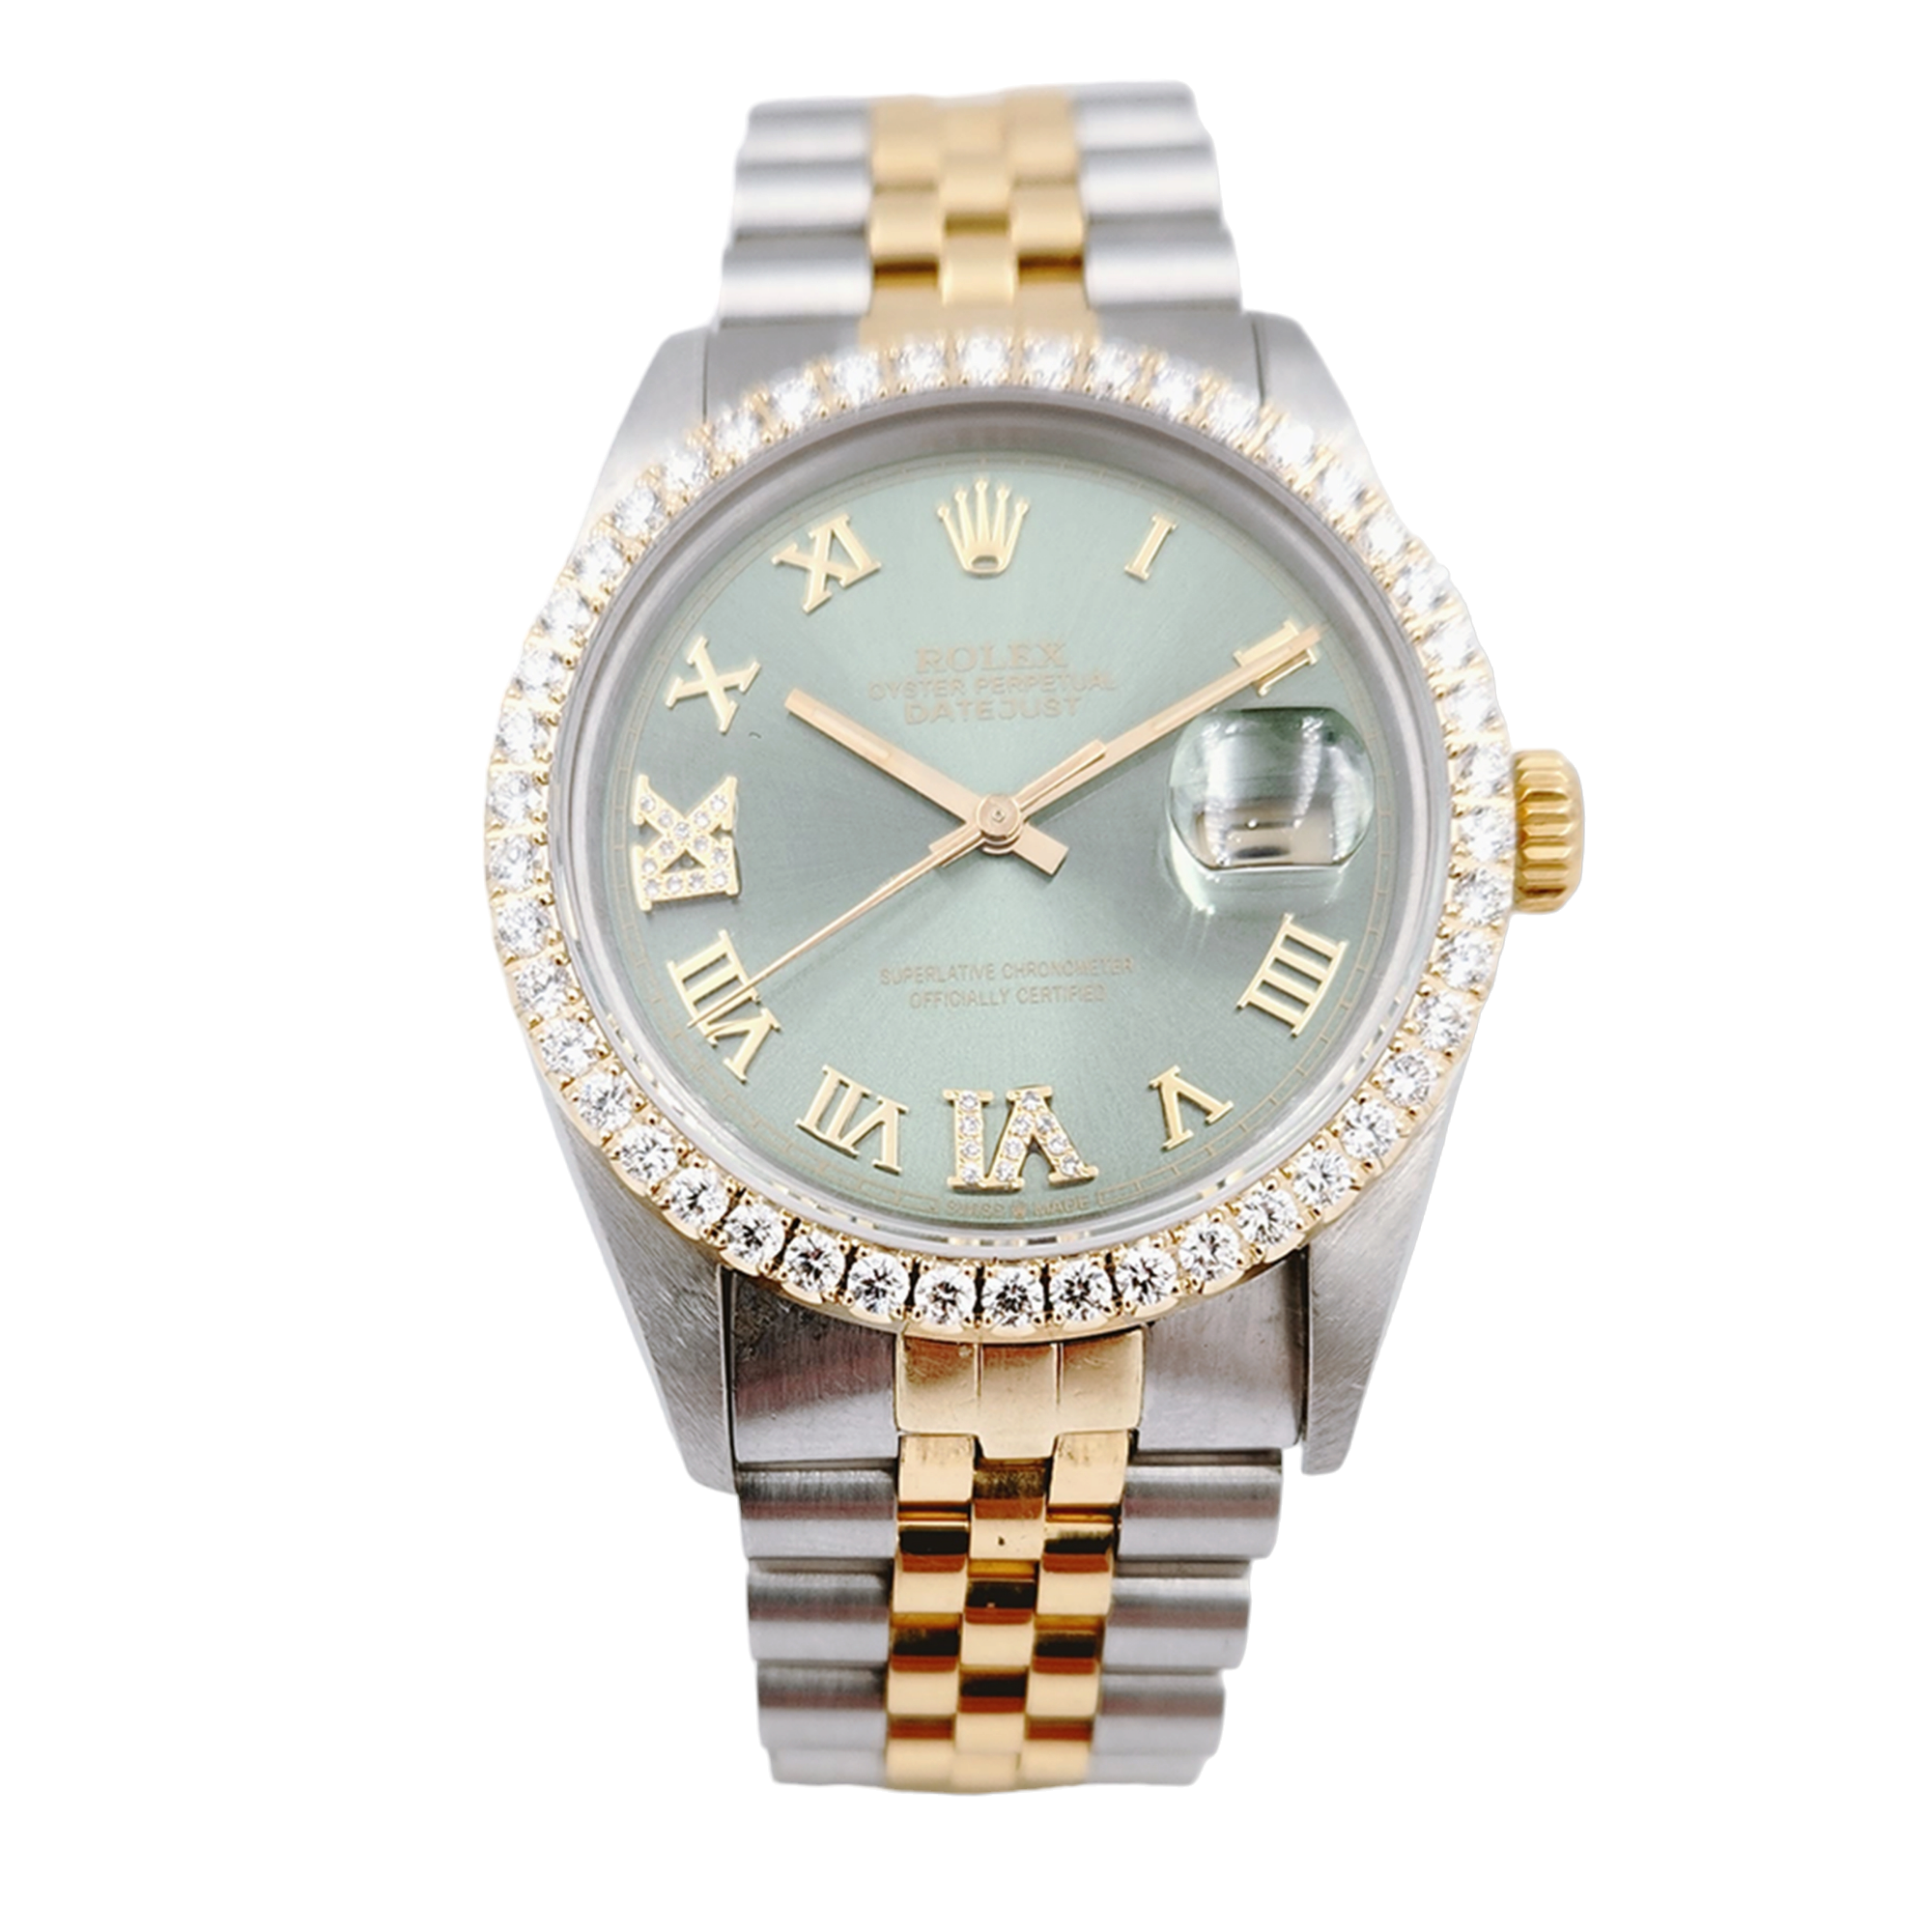 Men's Rolex 36mm DateJust Two Tone 18K Yellow Gold / Stainless Steel Wristwatch w/ Green Dial & Diamond Bezel. (Pre-Owned 16013)